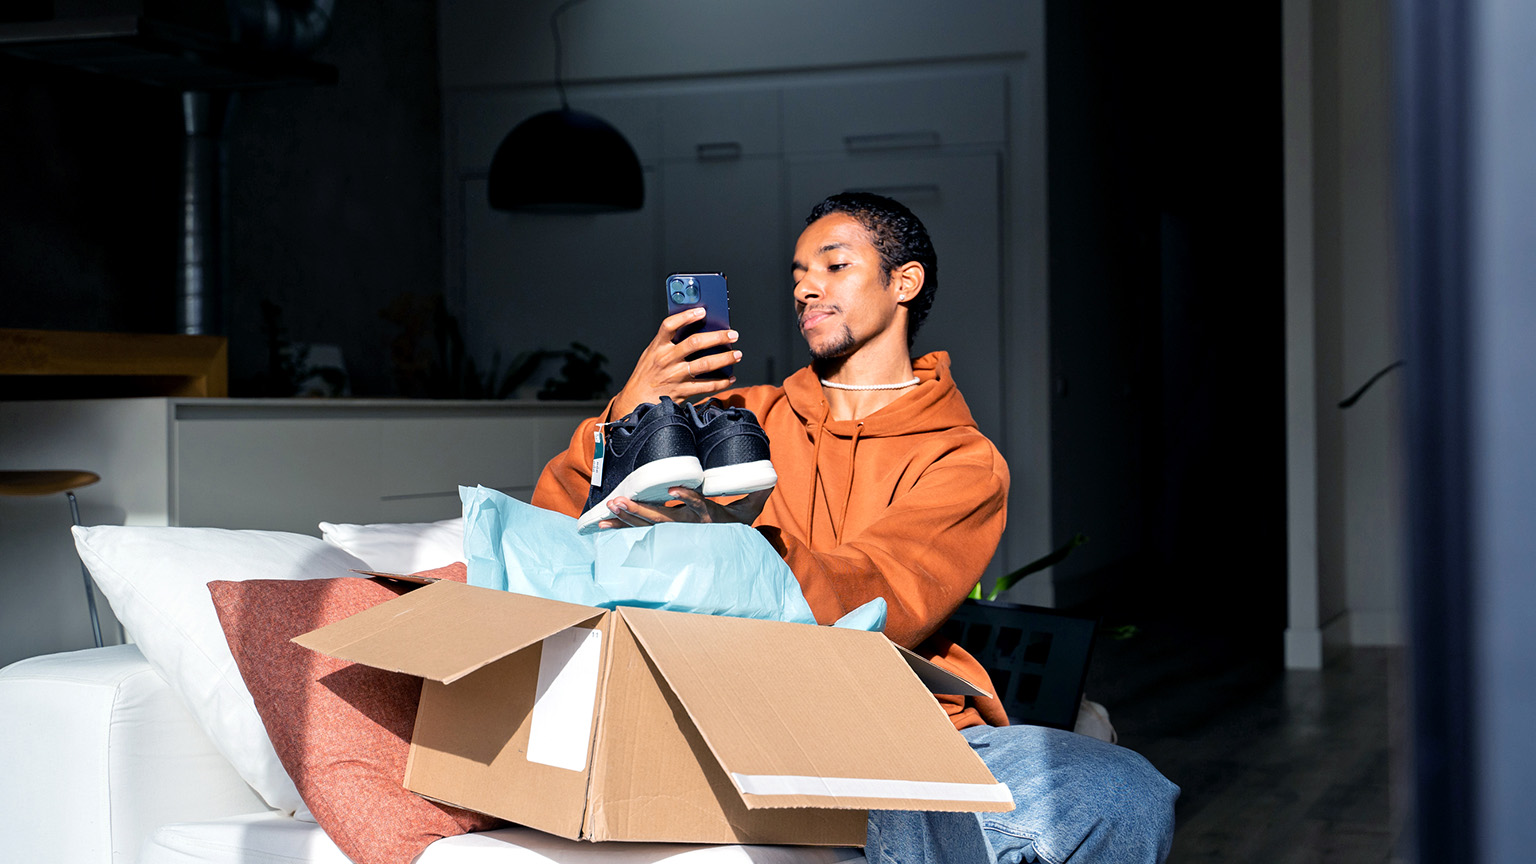 A young man lifts up a pair of new sneakers from a delivery box in order to capture an image for social media.